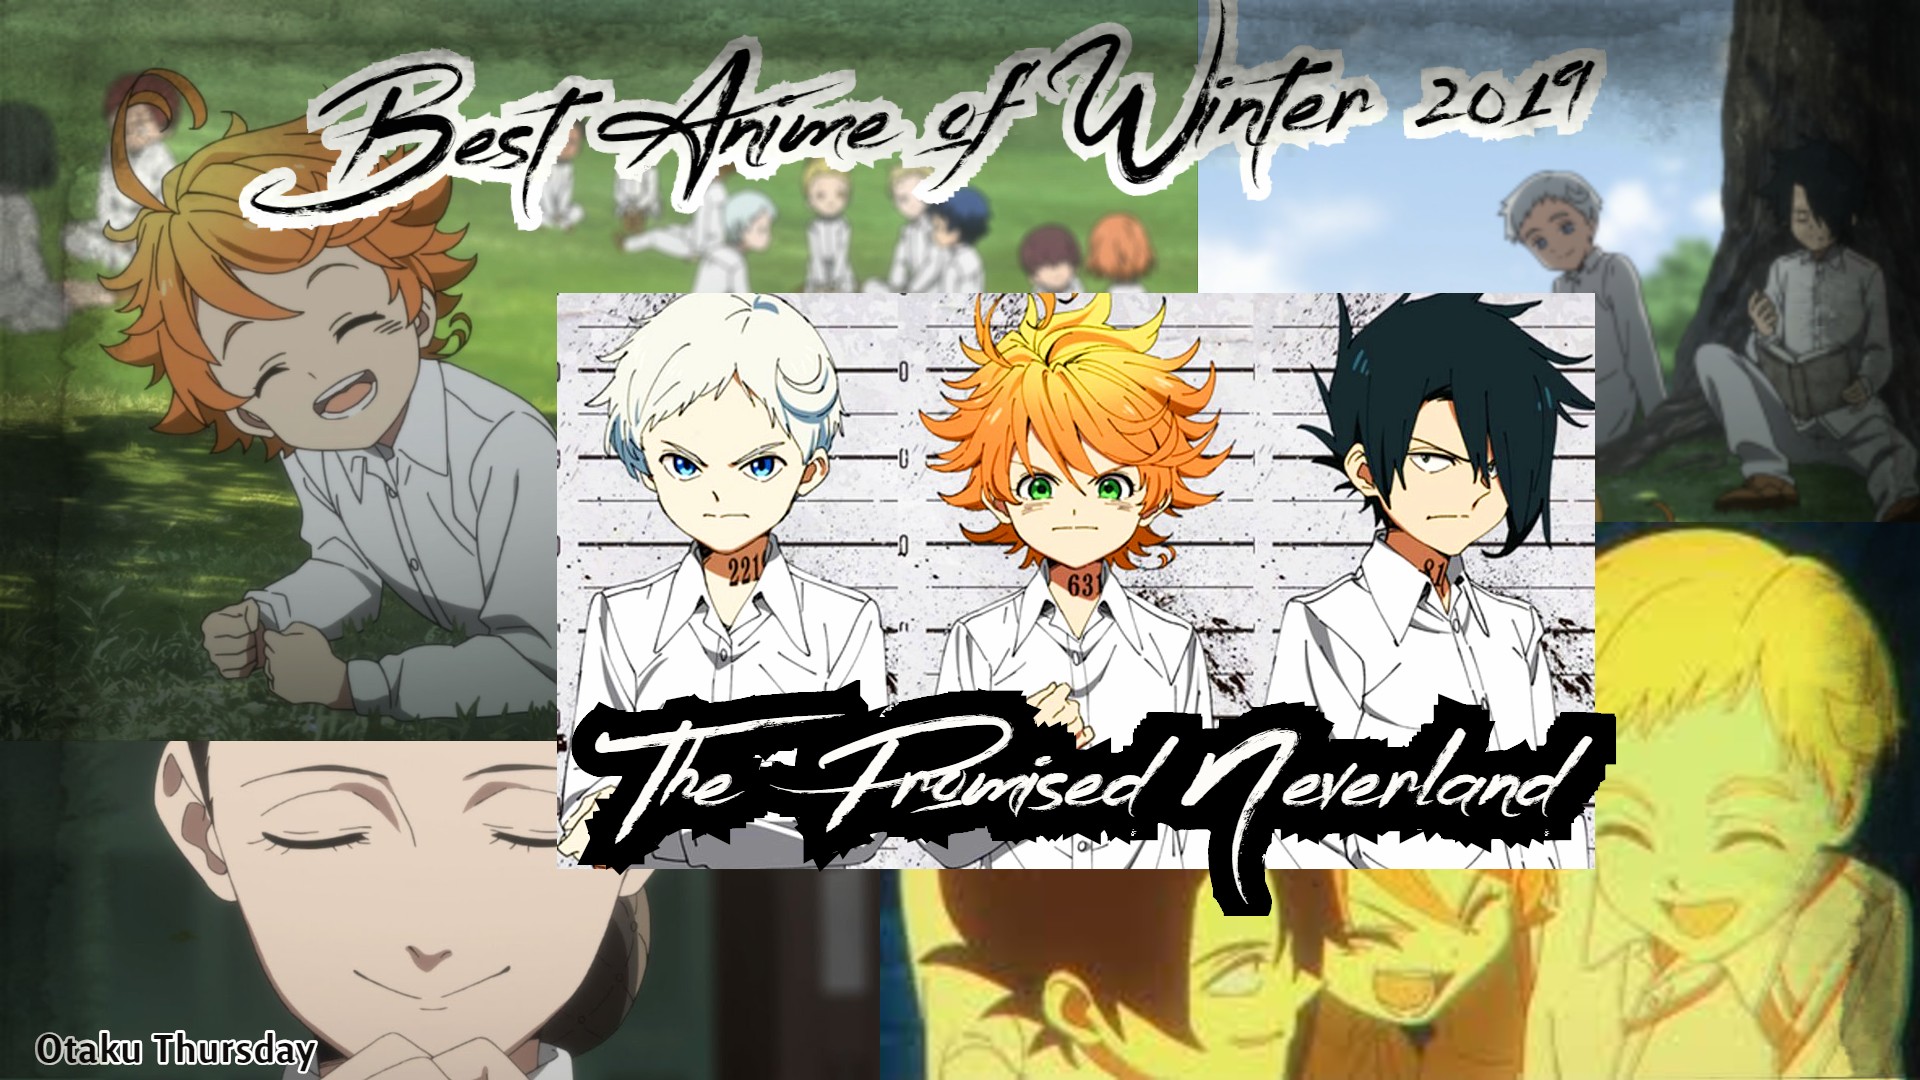 The Promised Neverland – The Review Heap